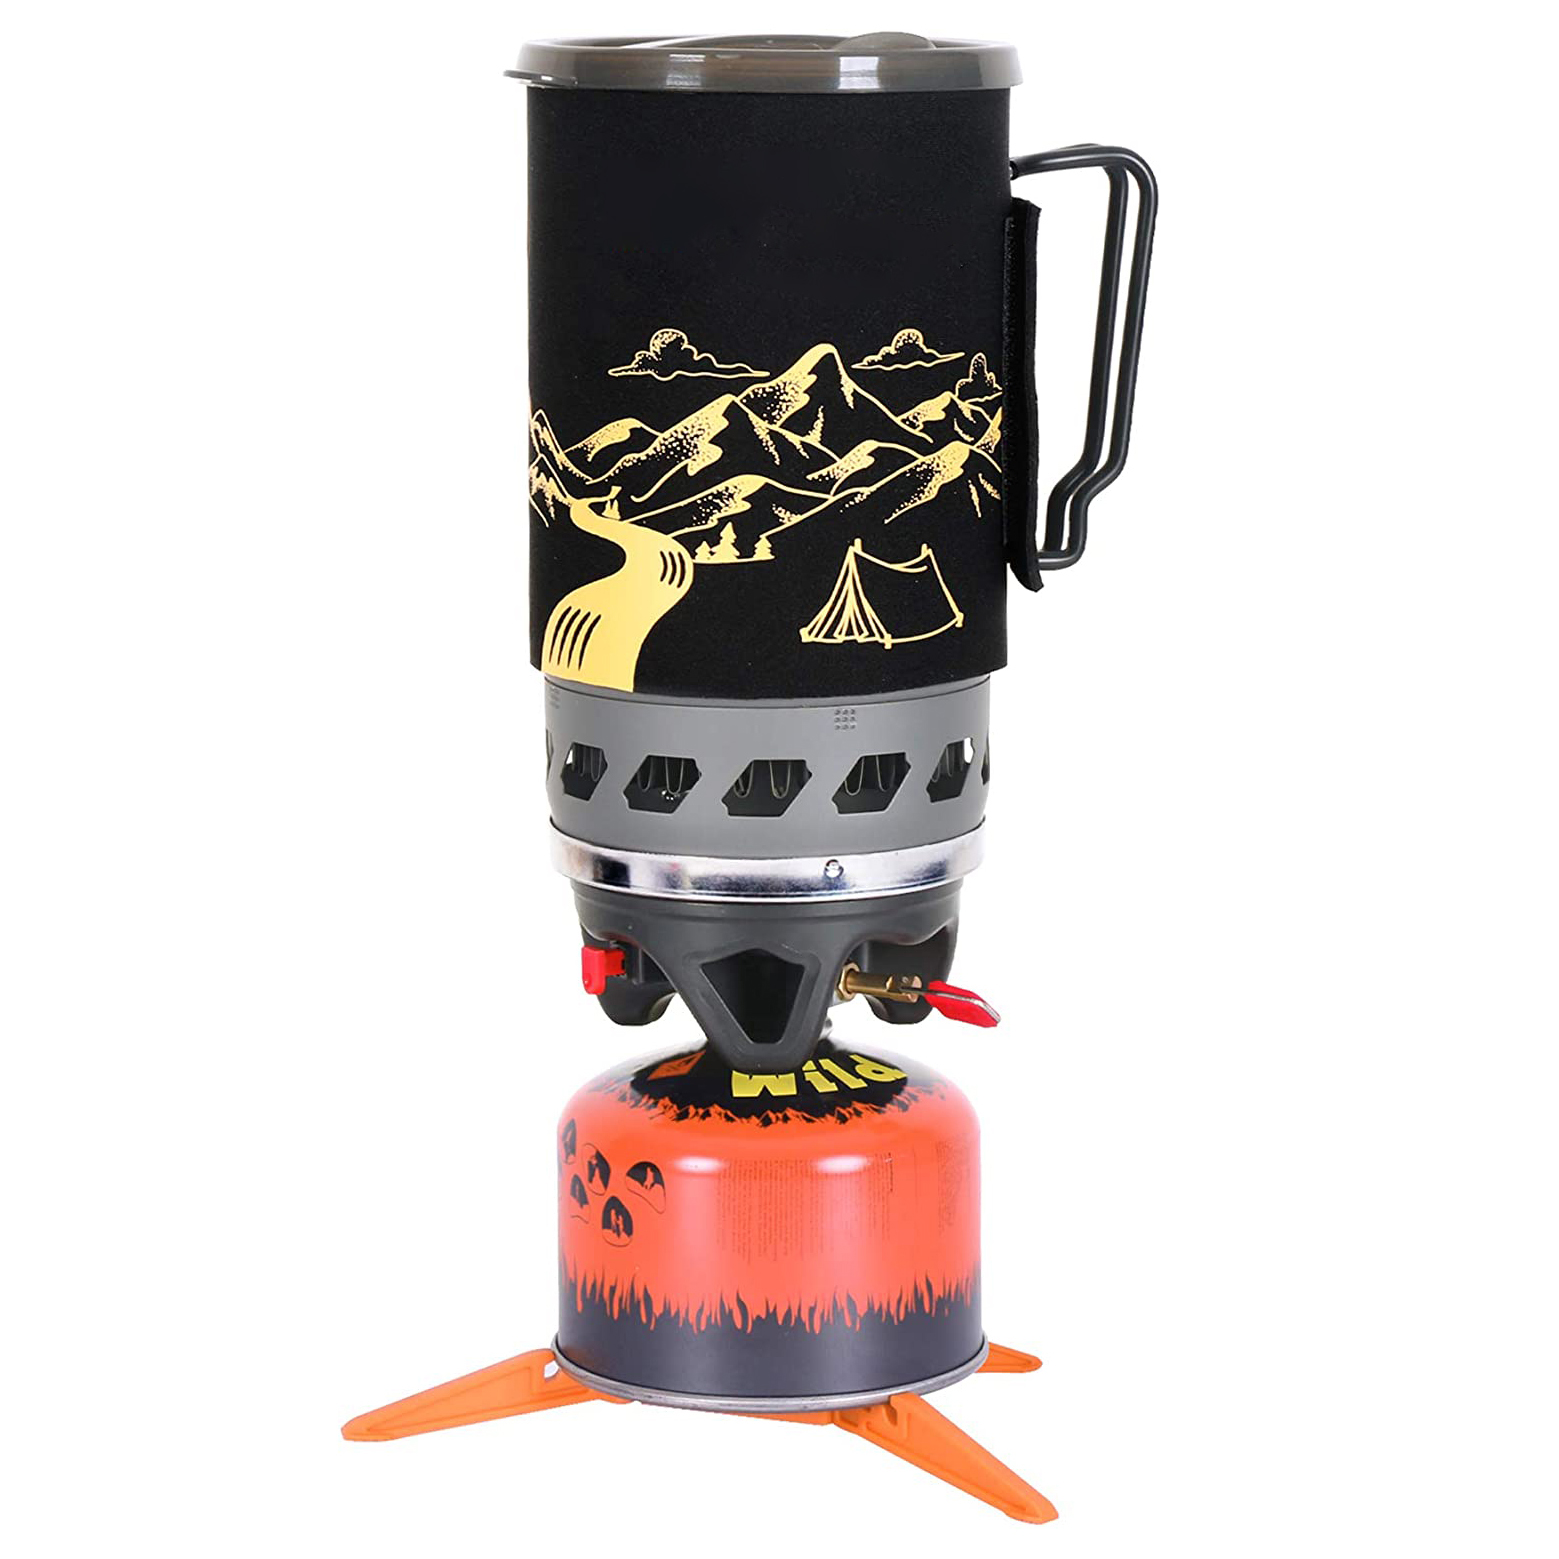 Backpacking Stove Cooking System Advantages & Disadvantages